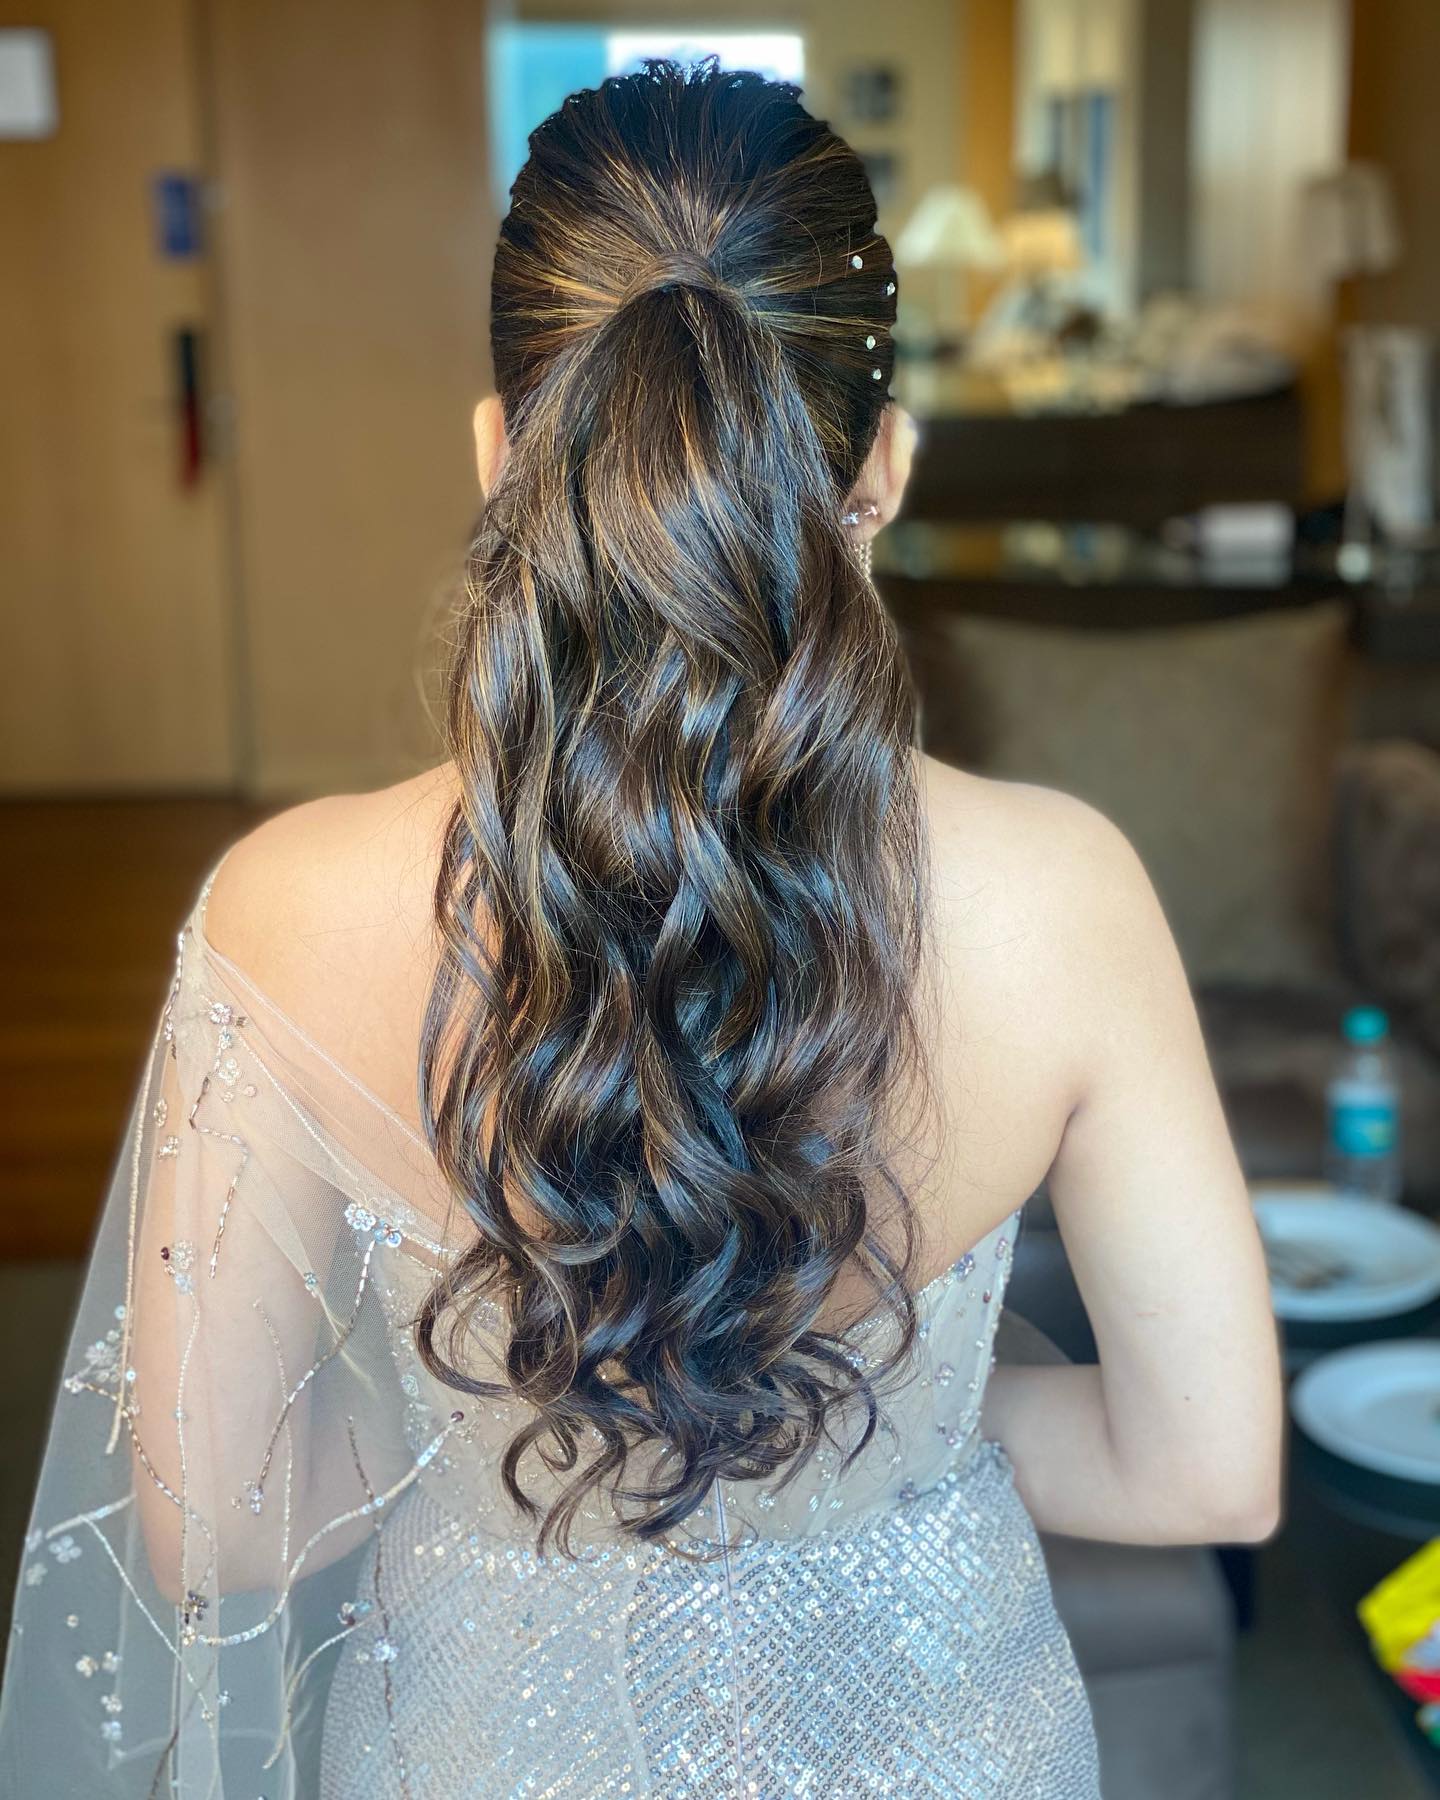 23 Stunning Curly Hairstyles for Lehenga: Transform Your Look